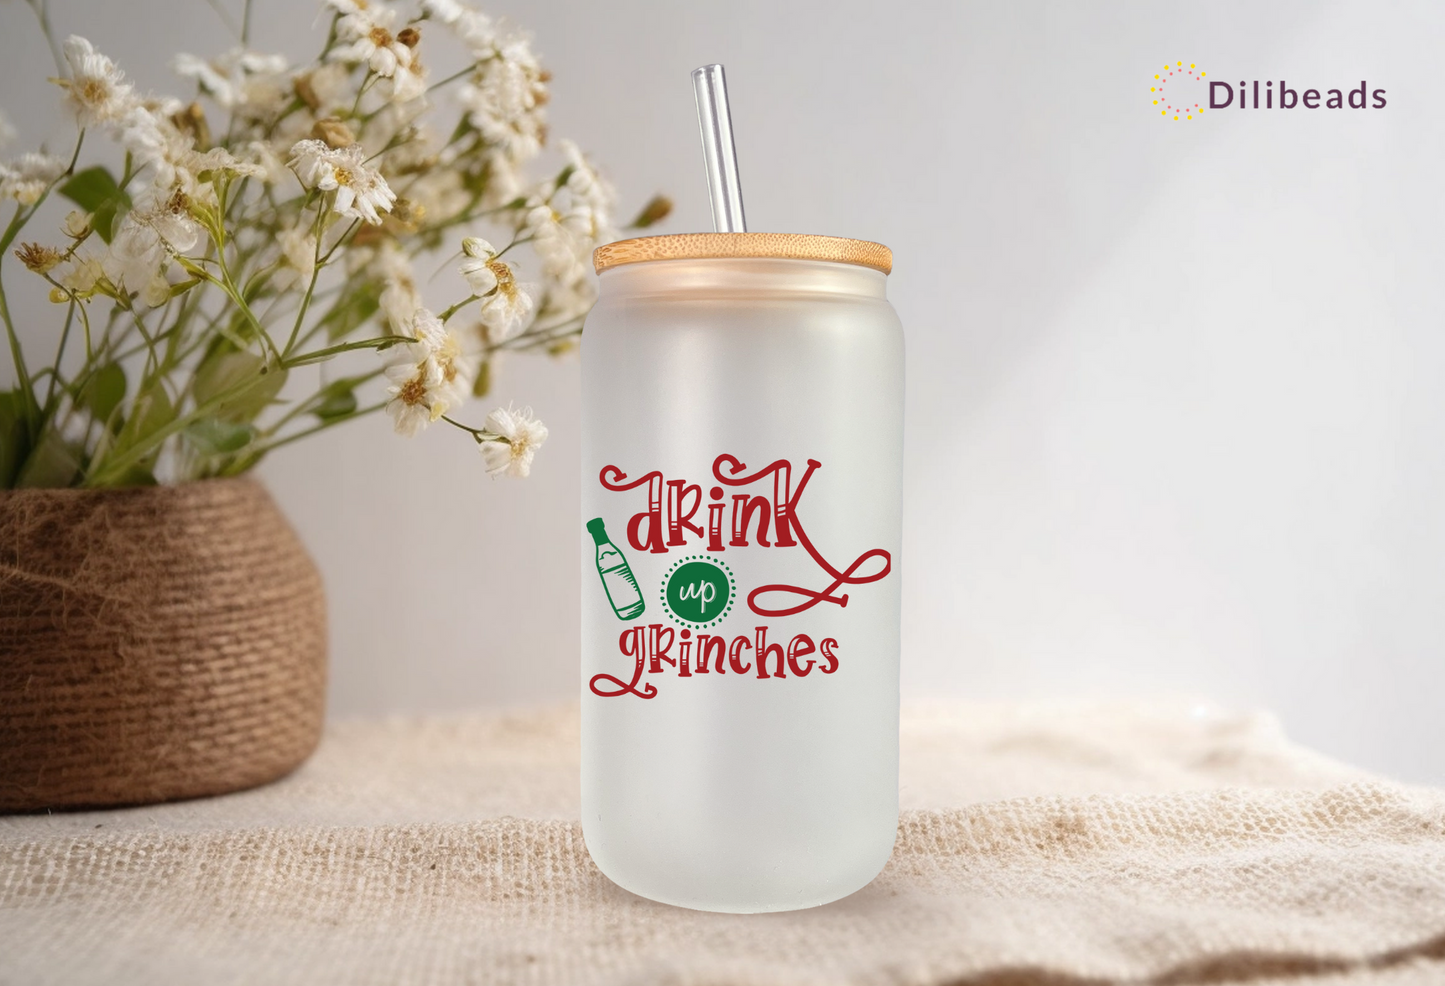 Drink up Grinches Glass Tumbler - Festive Christmas Gift - Holiday Drinkware - Funny Quote - 16oz Christmas Tumbler - Gift for Friends and Family